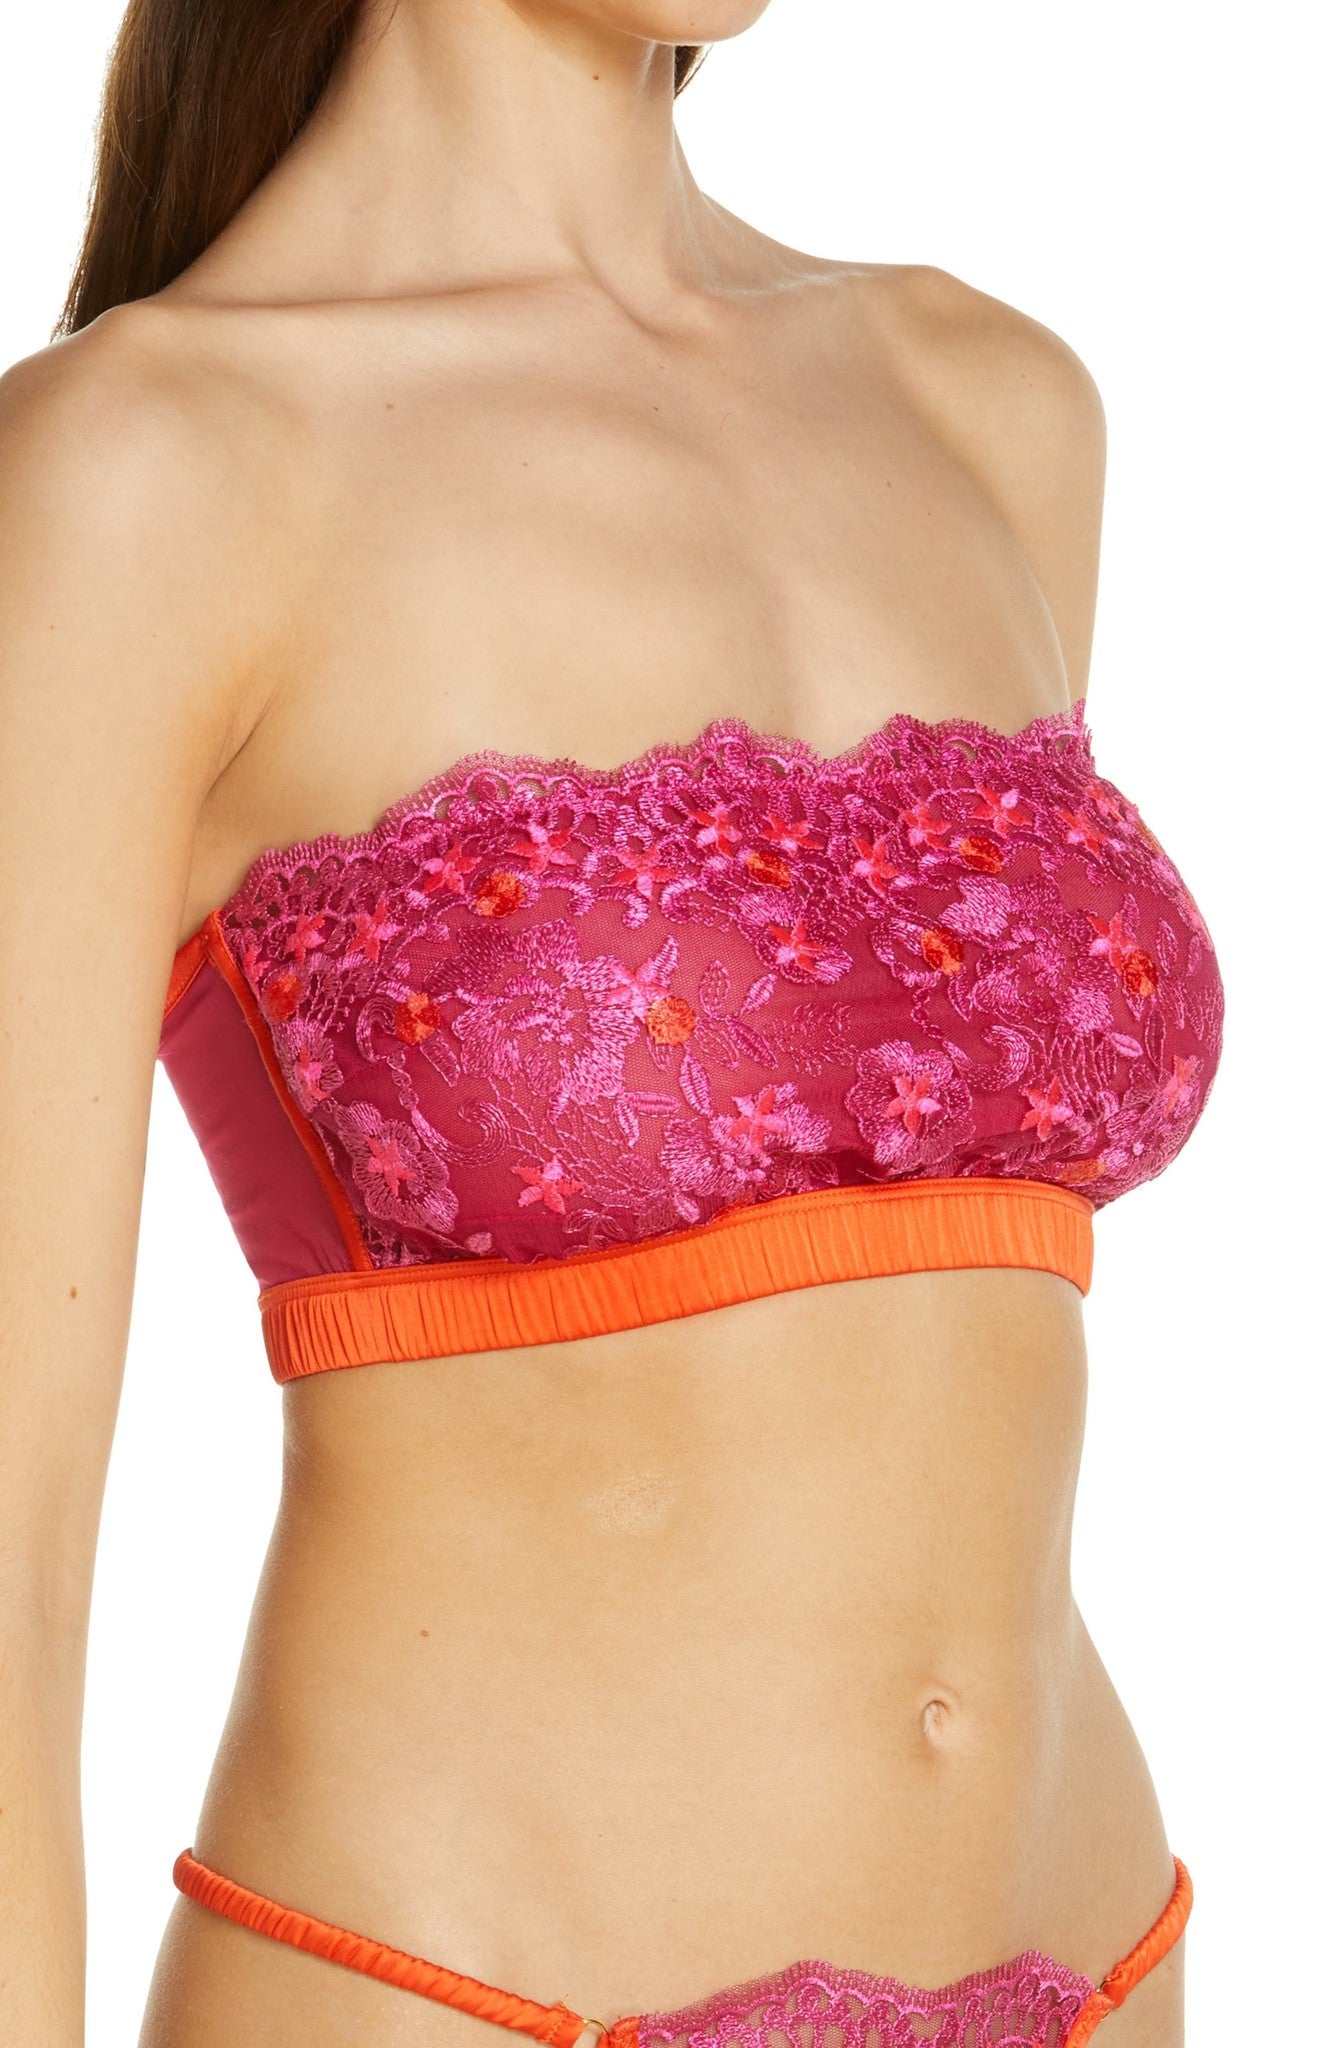 Embroidery Bandeau in Cherry Red & Orchid